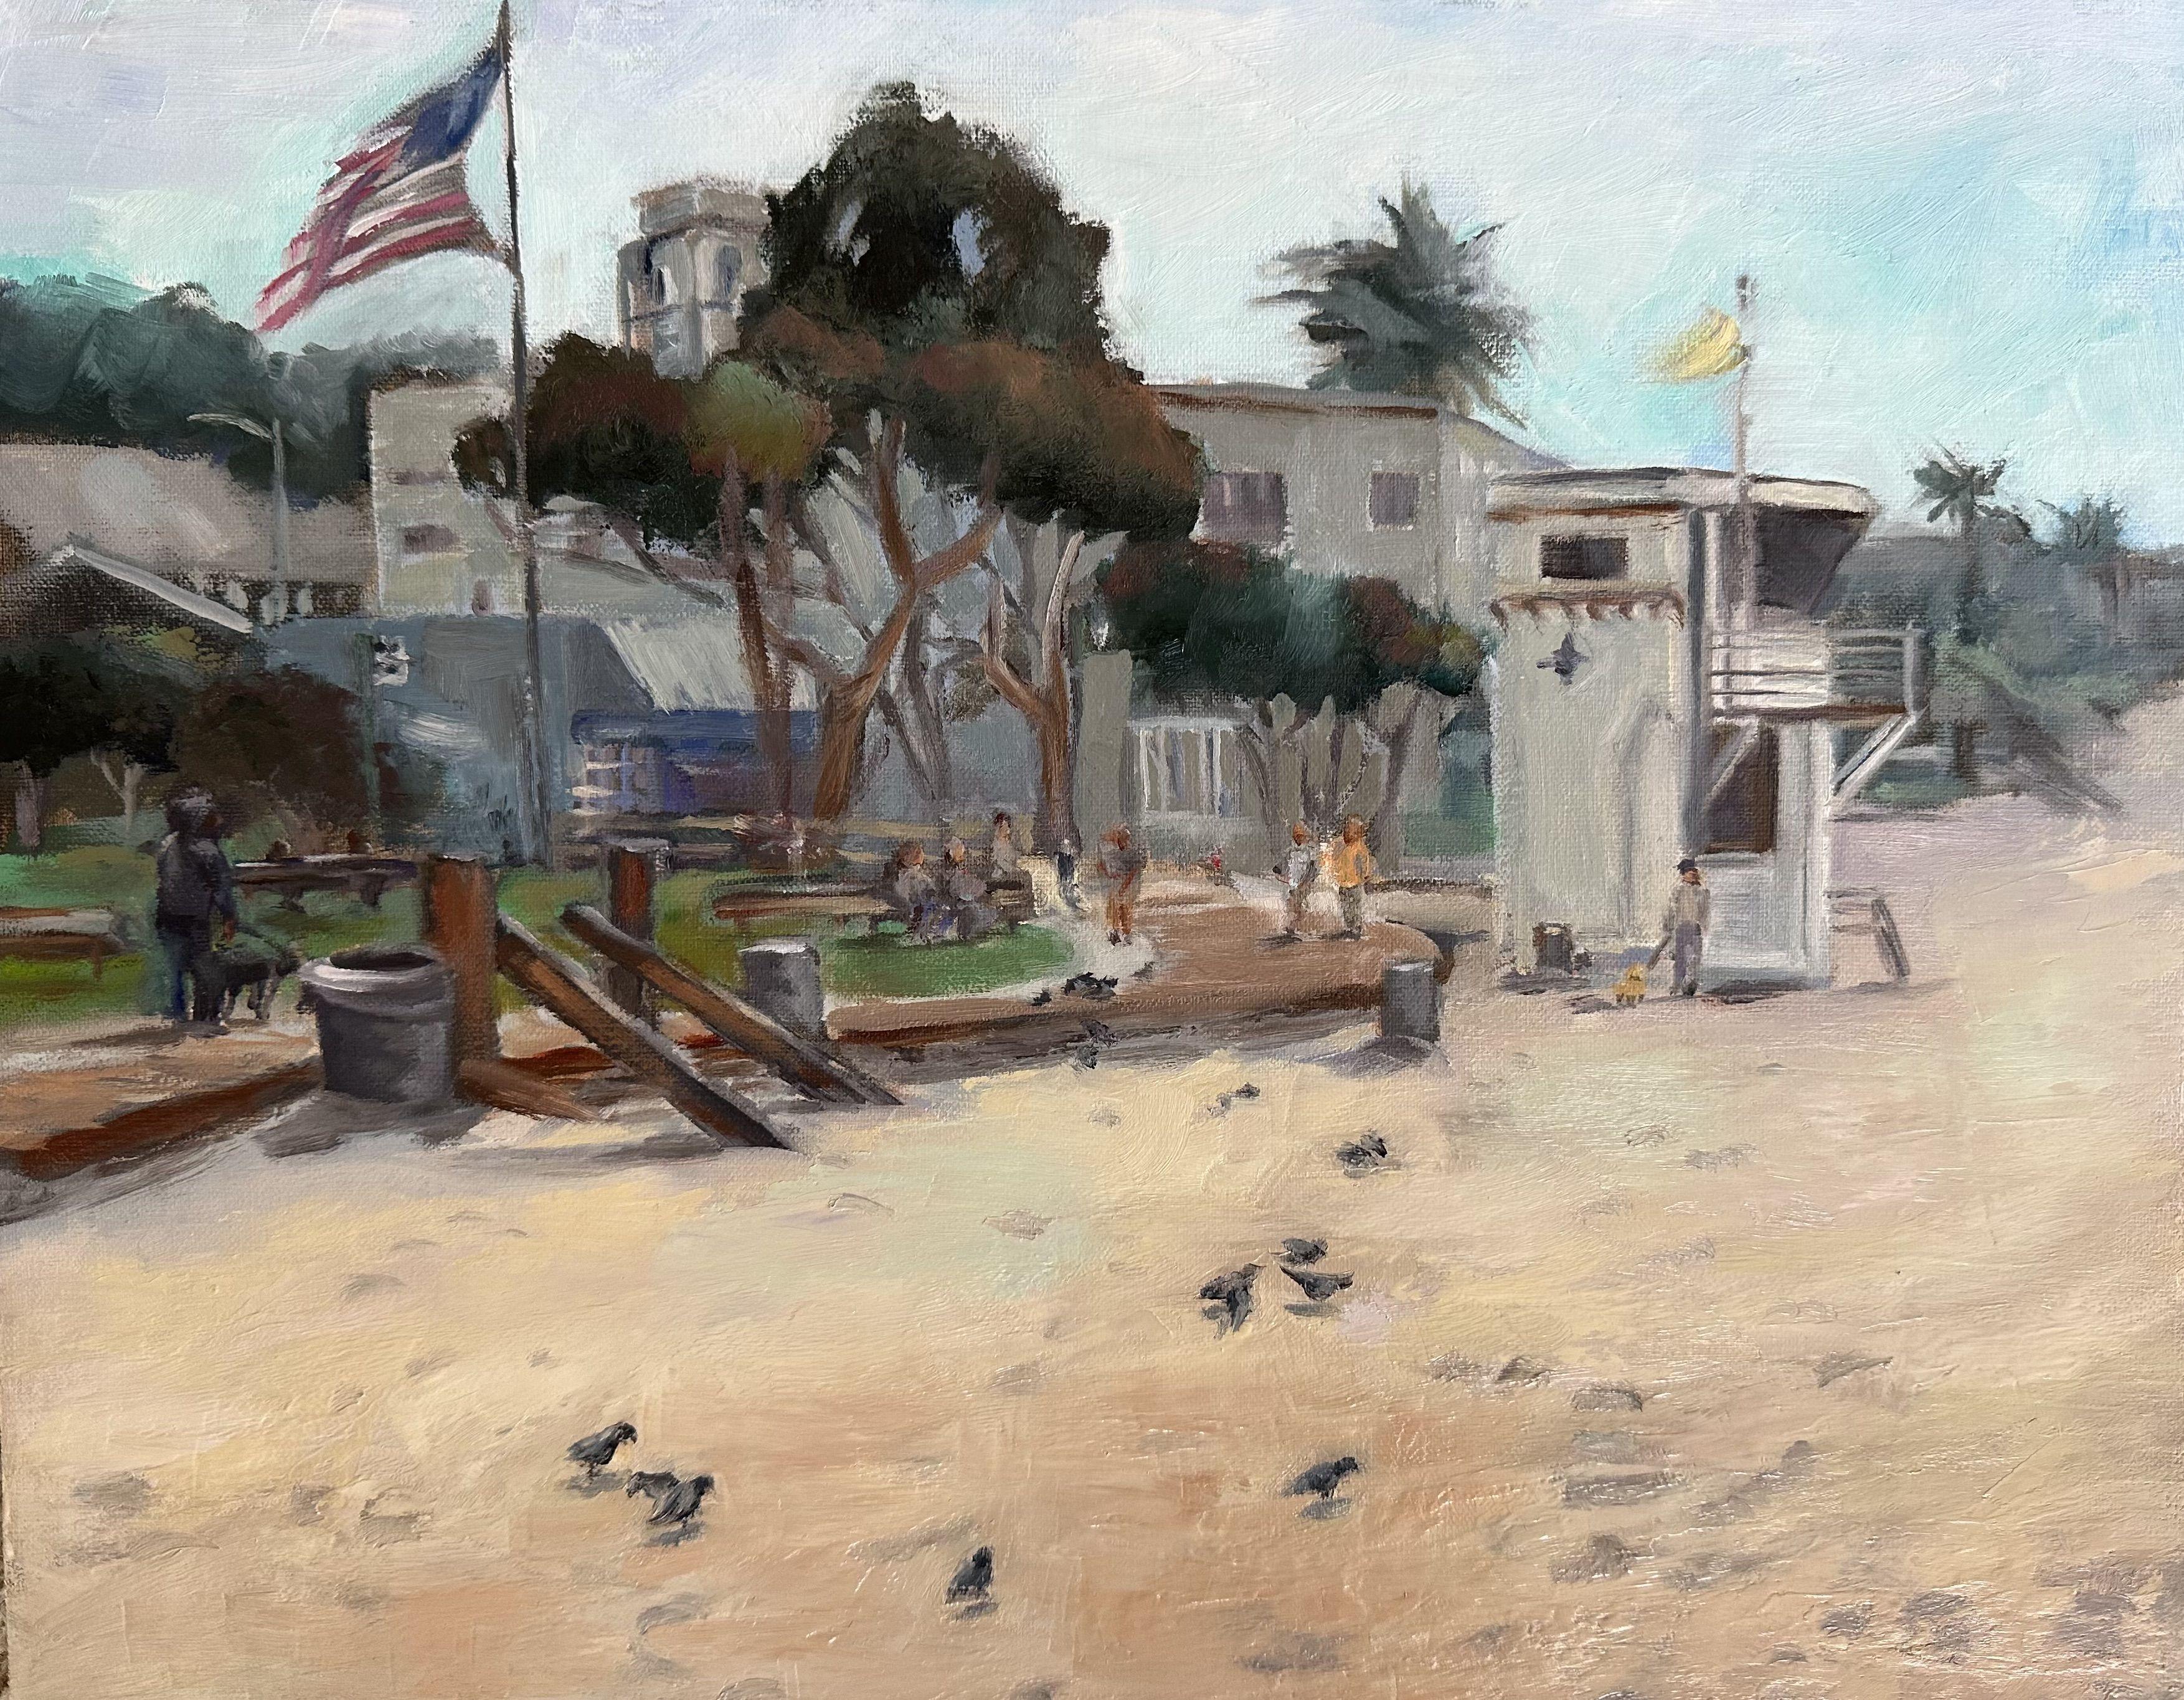 The painting depicts the vibrant atmosphere of Main Beach in Laguna with its bustling crowds and lively energy. It invites the viewer to take a walk along the shore and immerse themselves in the lively atmosphere of Main Beach in Laguna. :: Painting